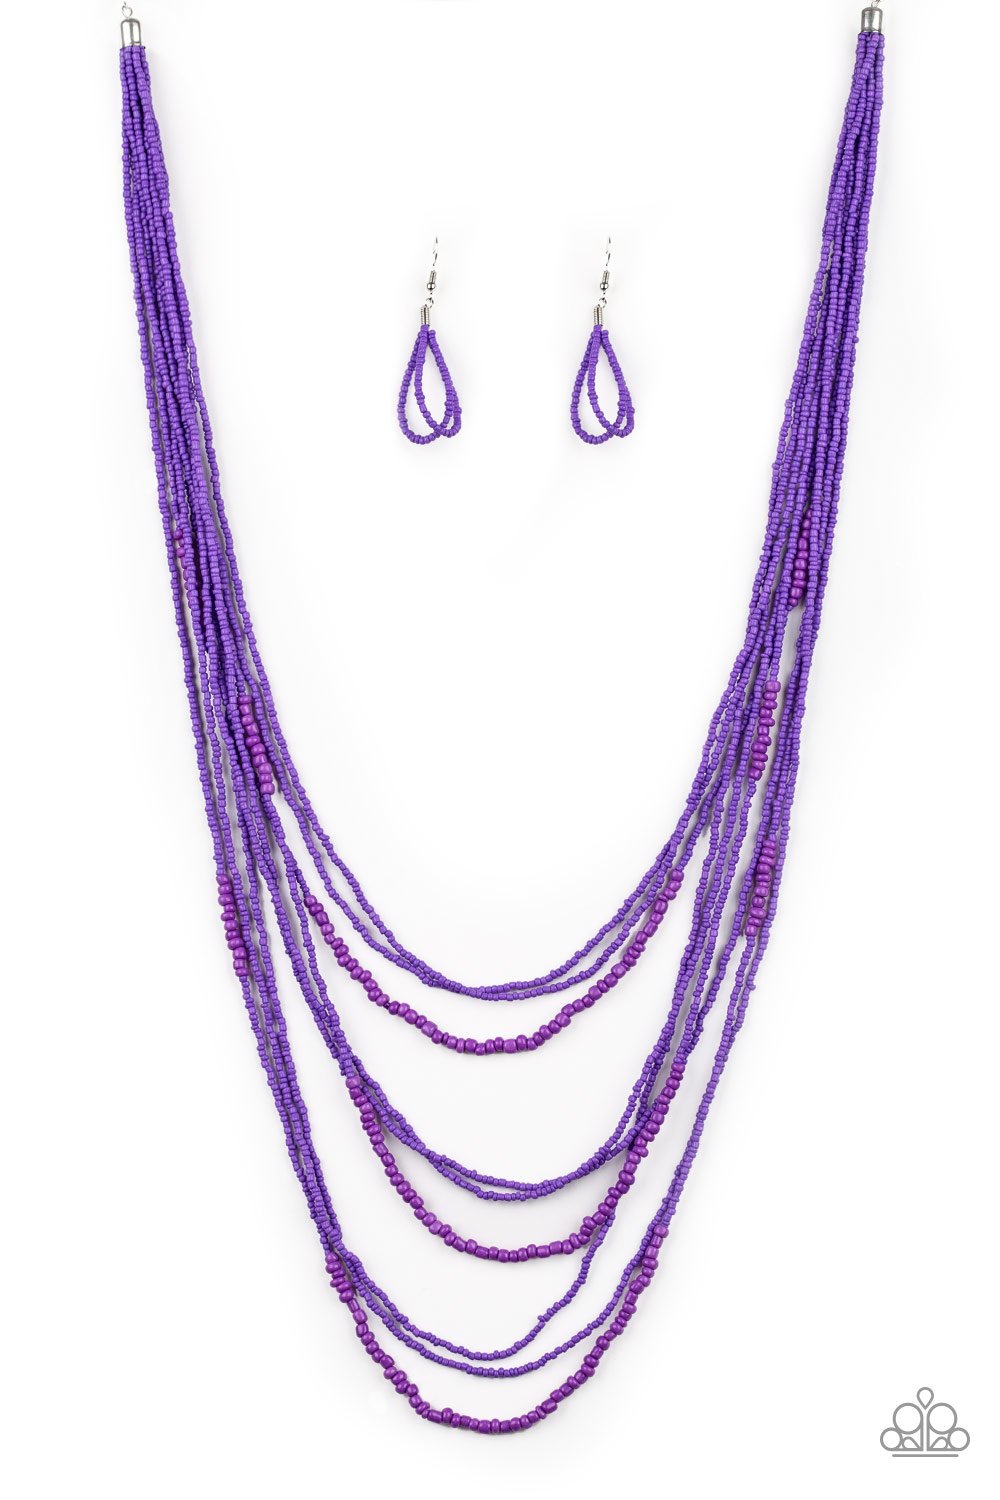 Totally Tonga - purple seed bead necklace